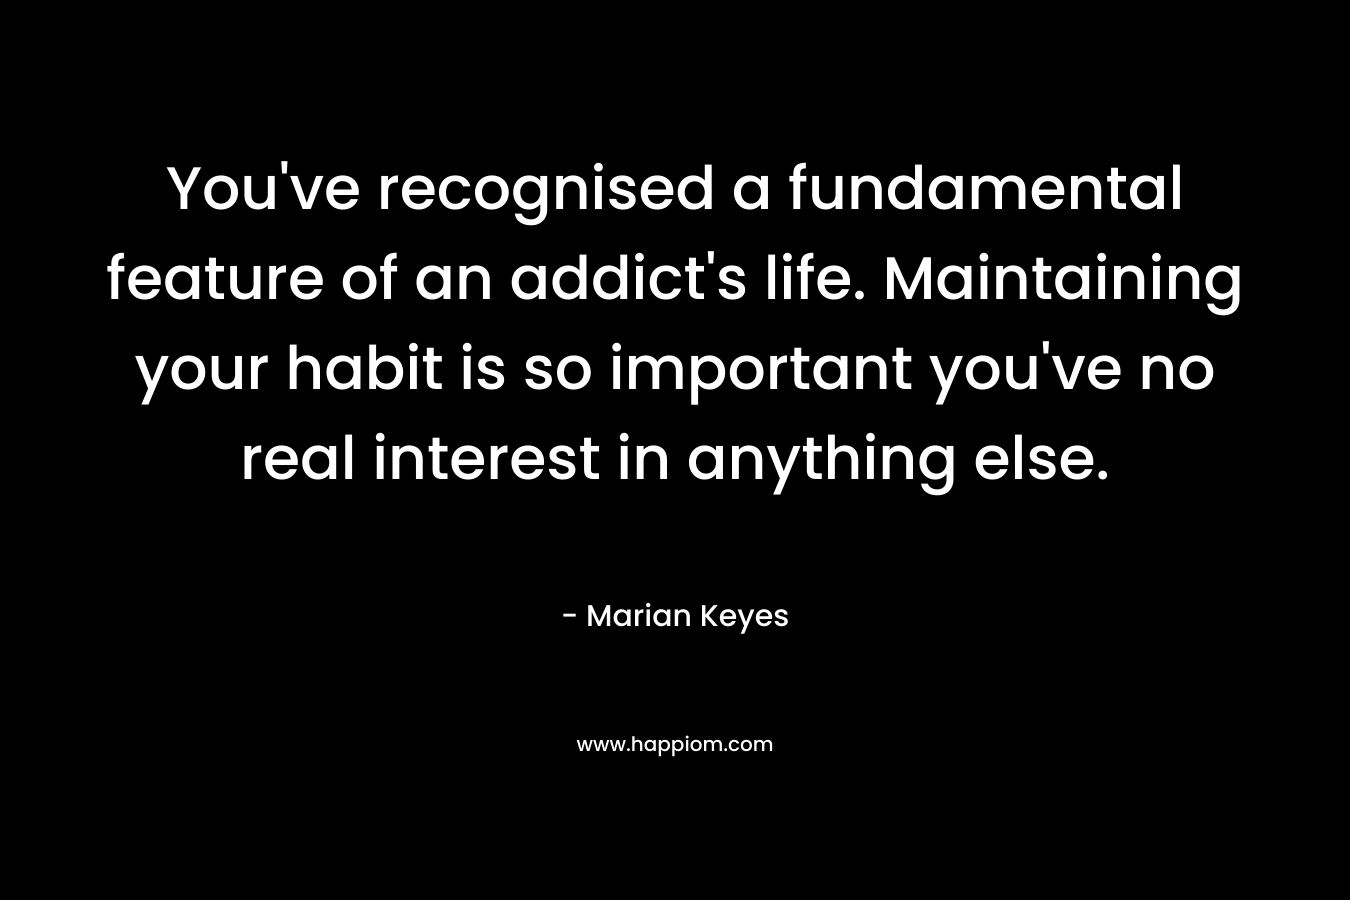 You’ve recognised a fundamental feature of an addict’s life. Maintaining your habit is so important you’ve no real interest in anything else. – Marian Keyes